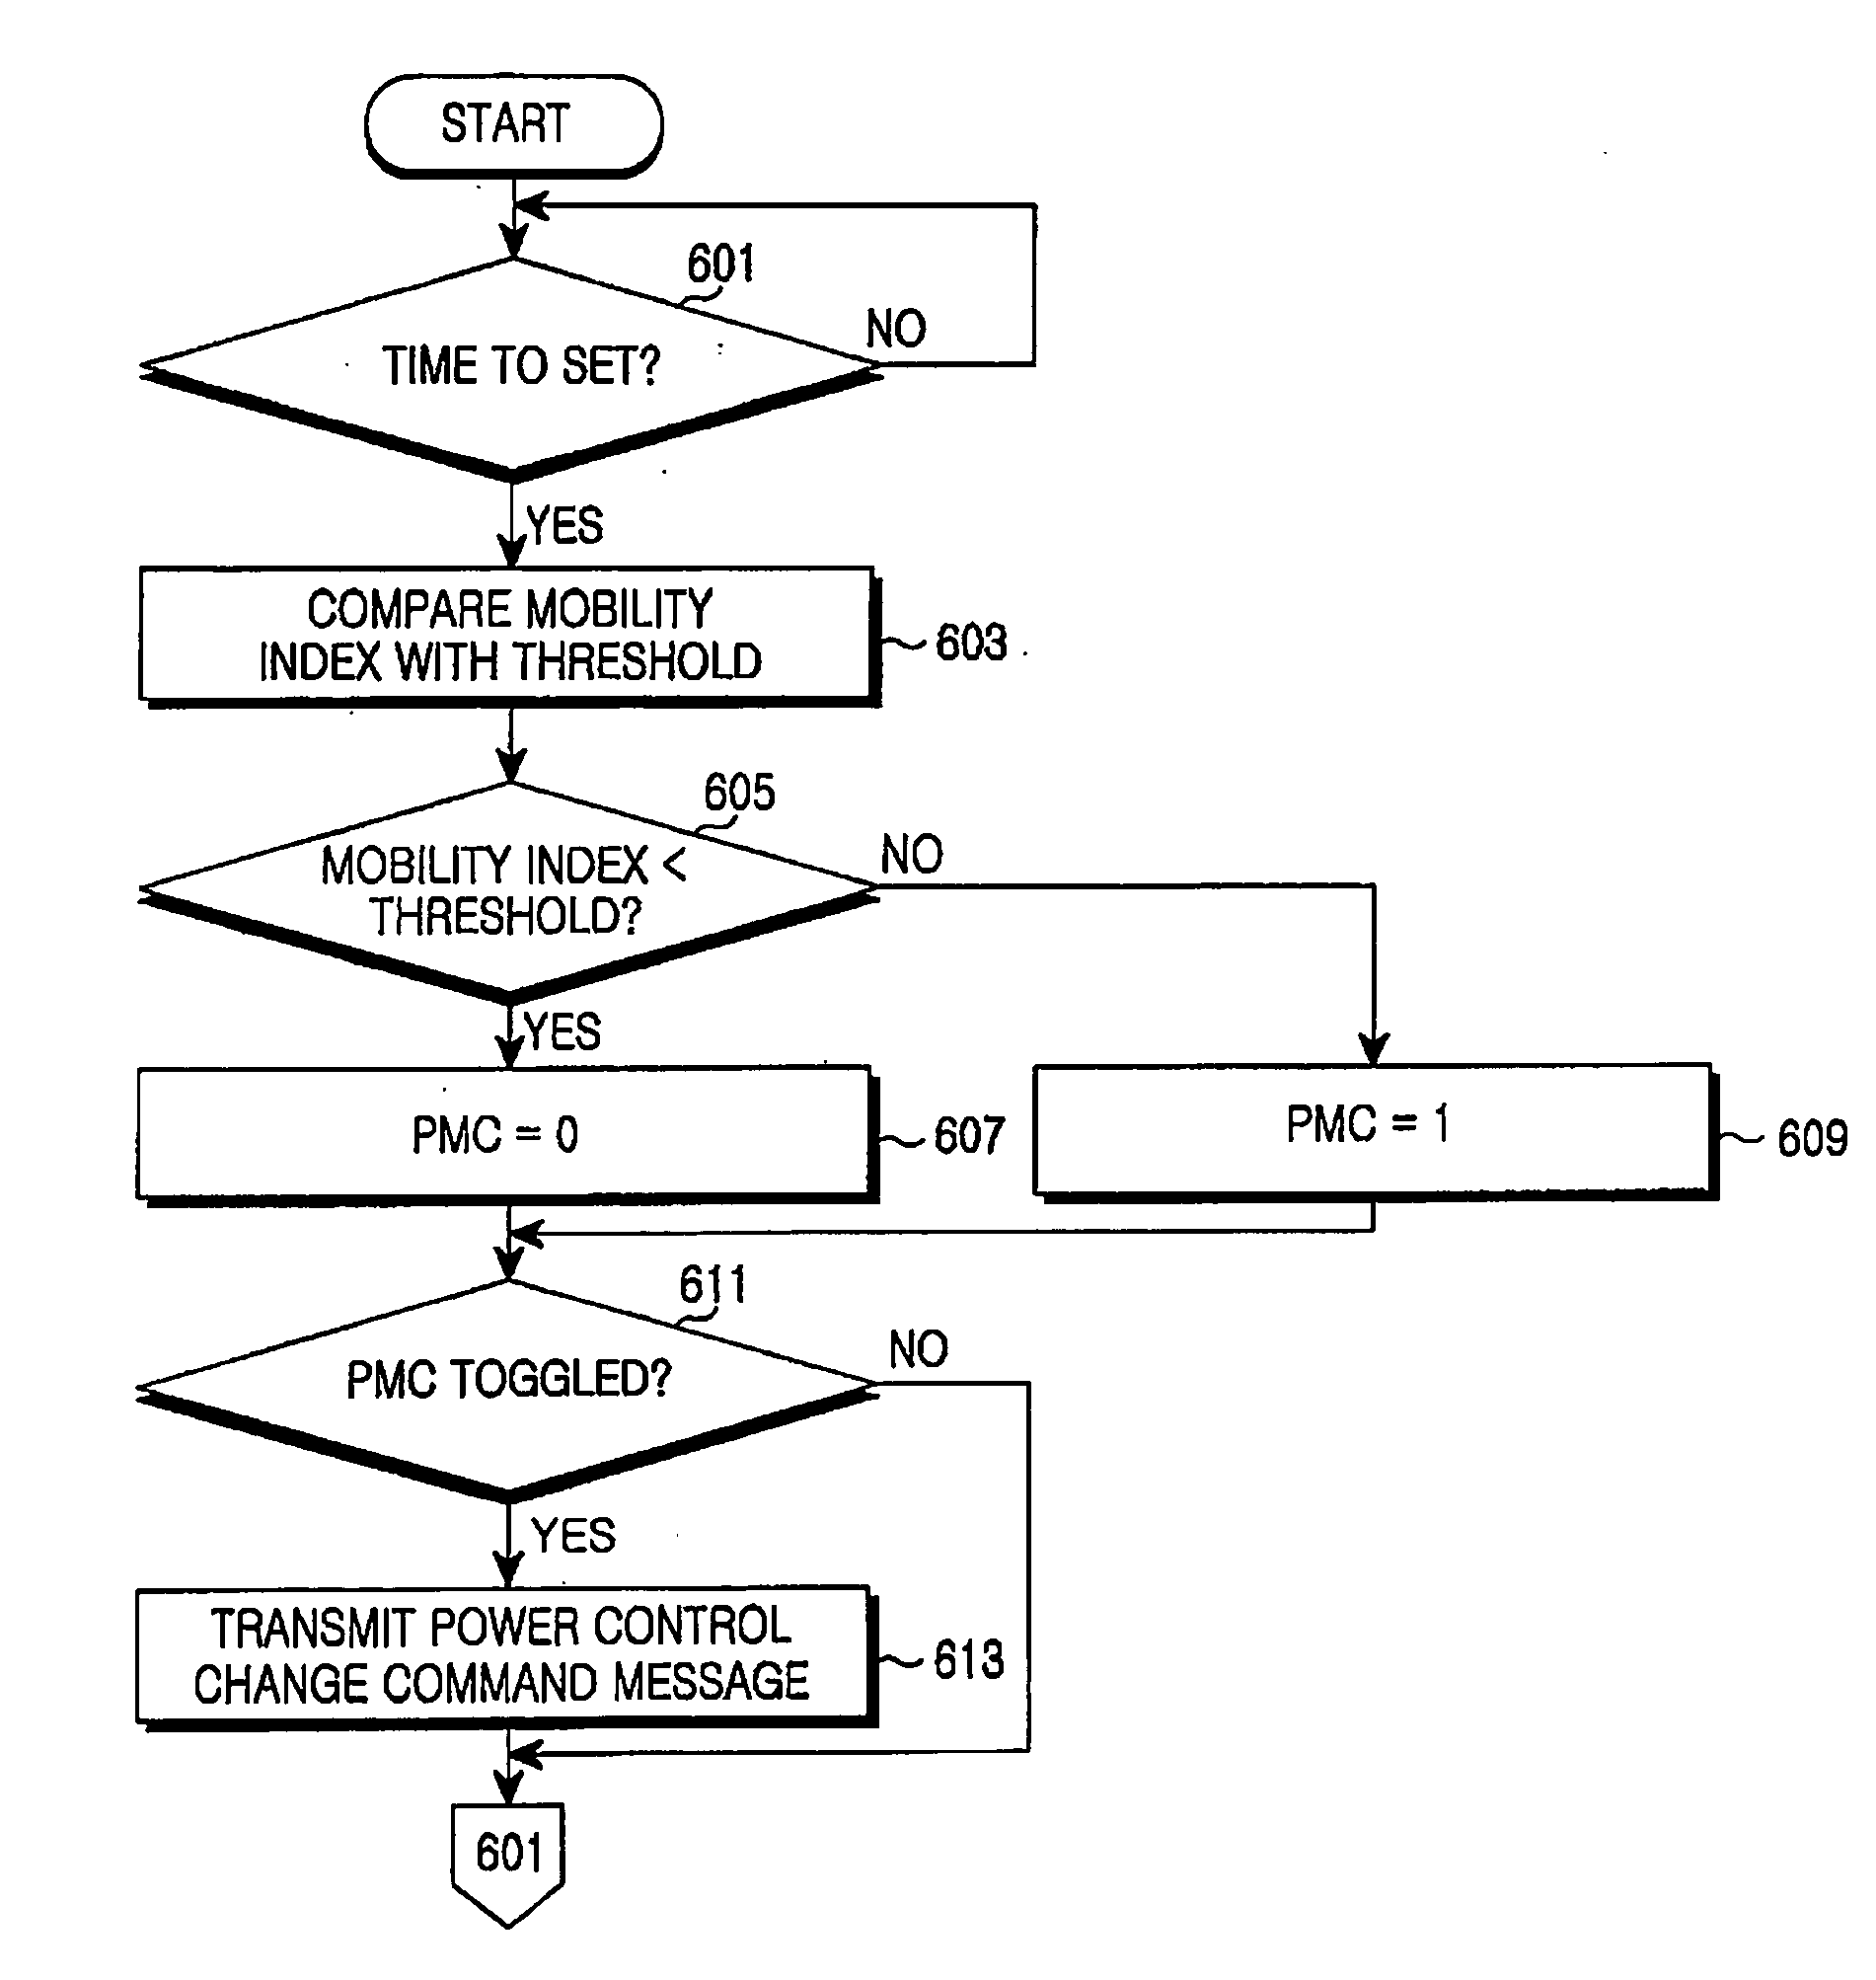 Apparatus and method for adaptively changing uplink power control scheme according to mobile status in a TDD mobile communication system